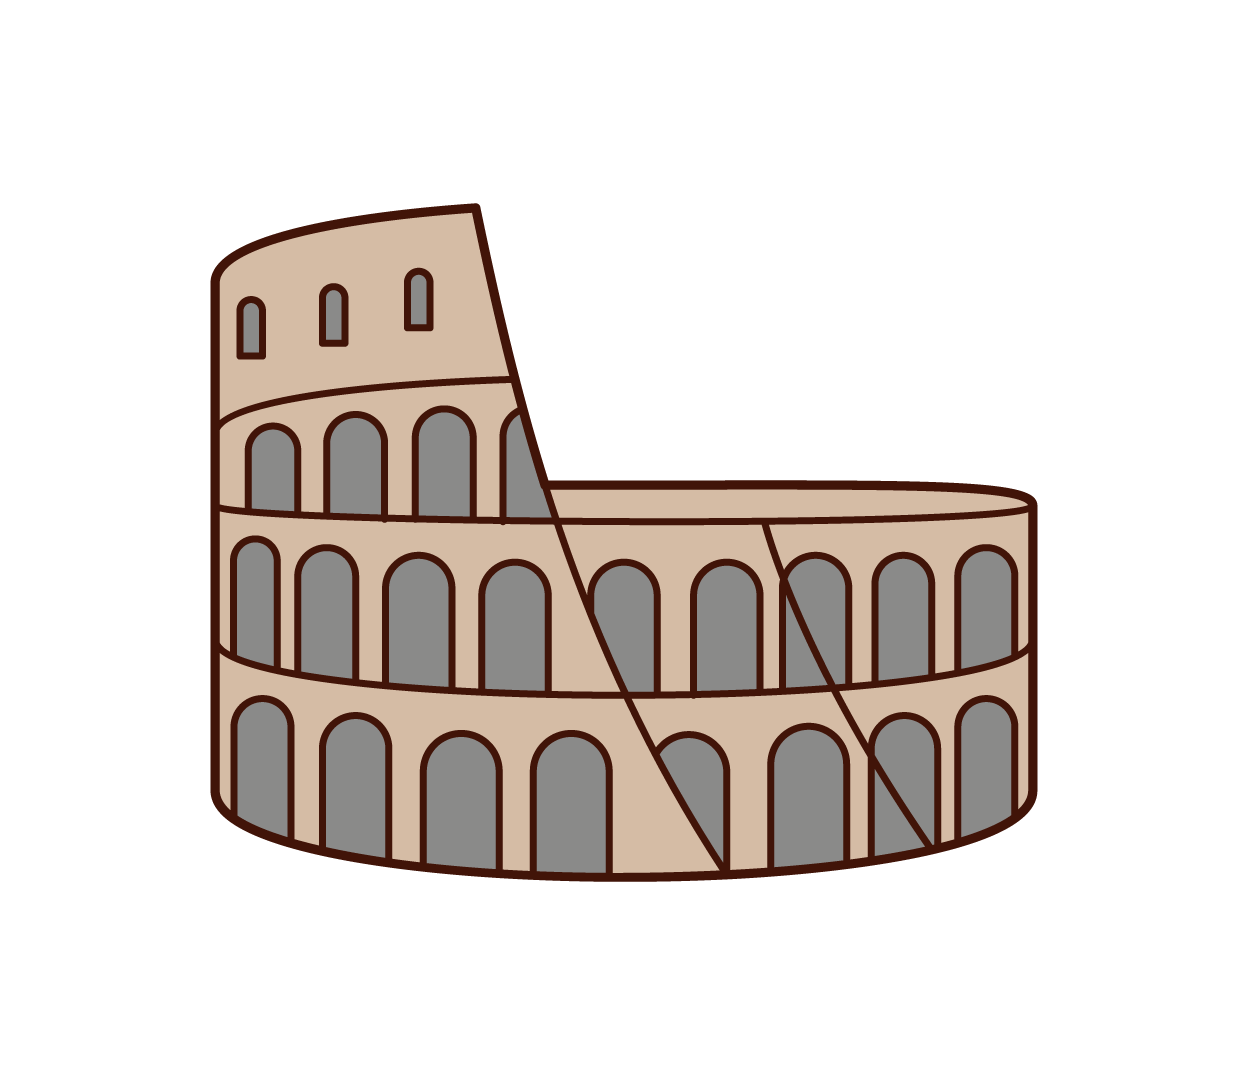 Illustration of the Colosseum